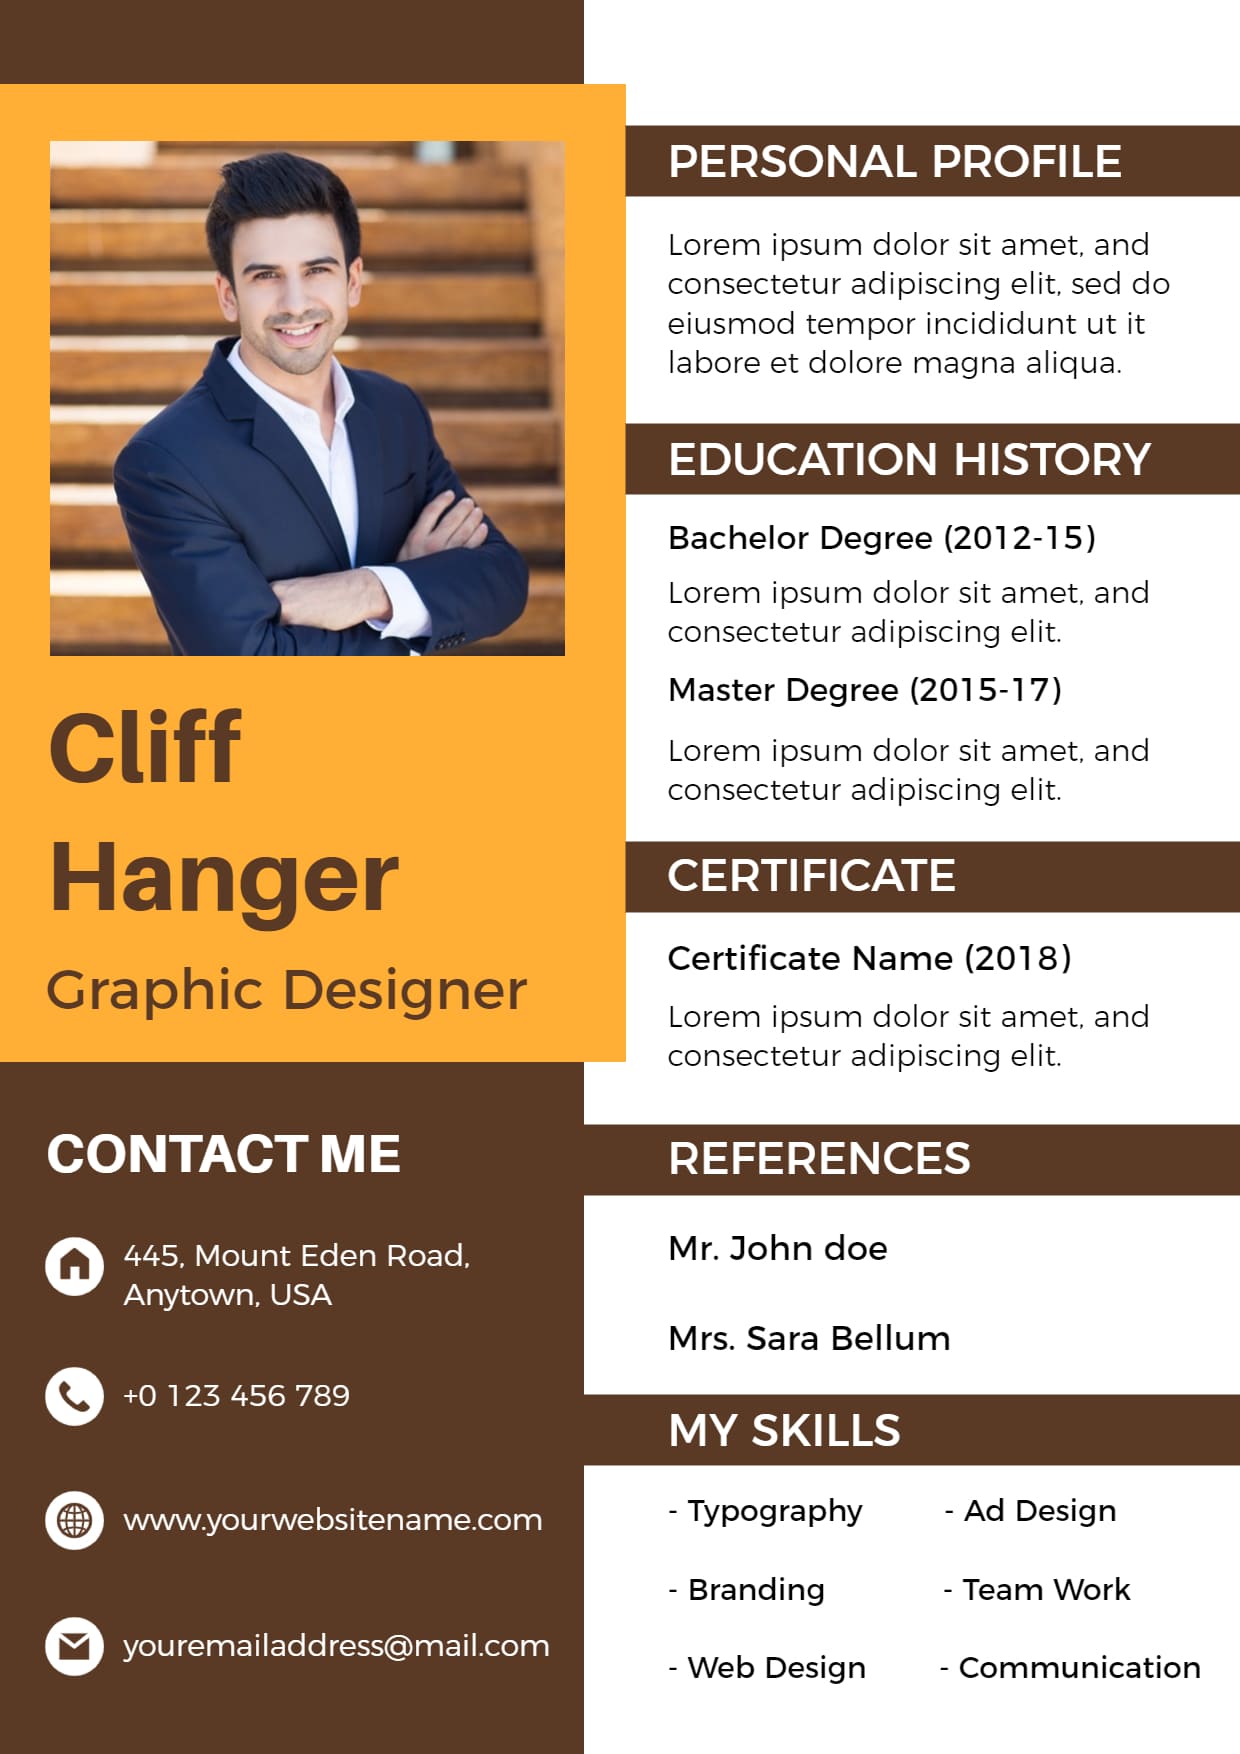 Entry-level Graphic Designer Resume template examples